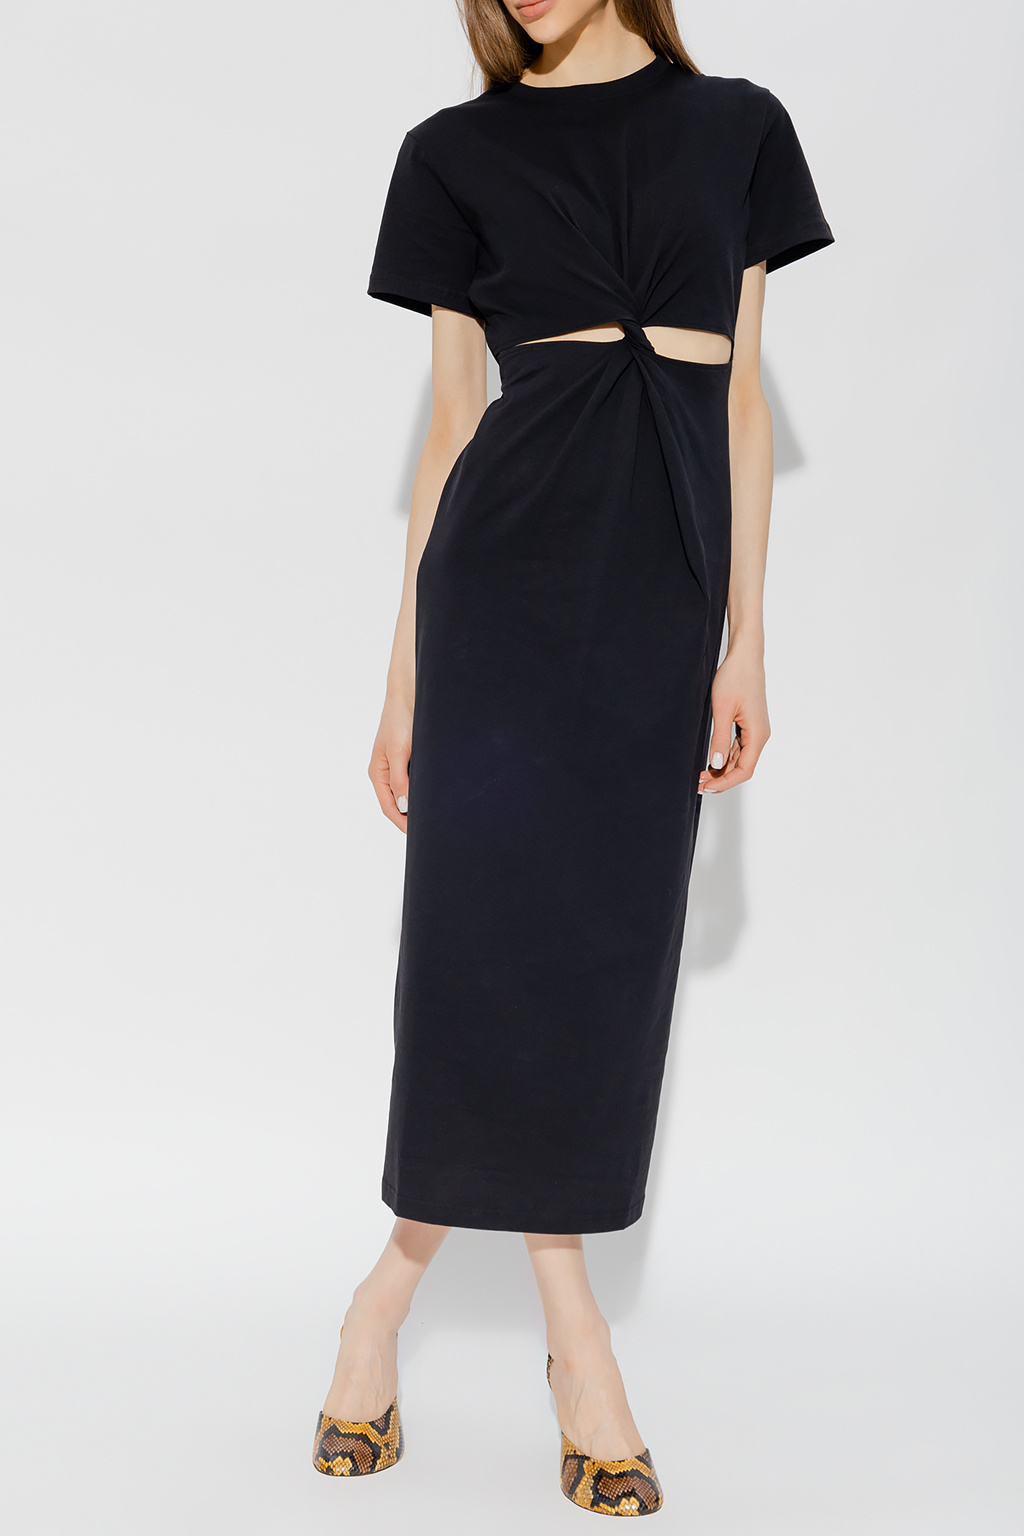 HERSKIND ‘Zach’ dress with cut-outs